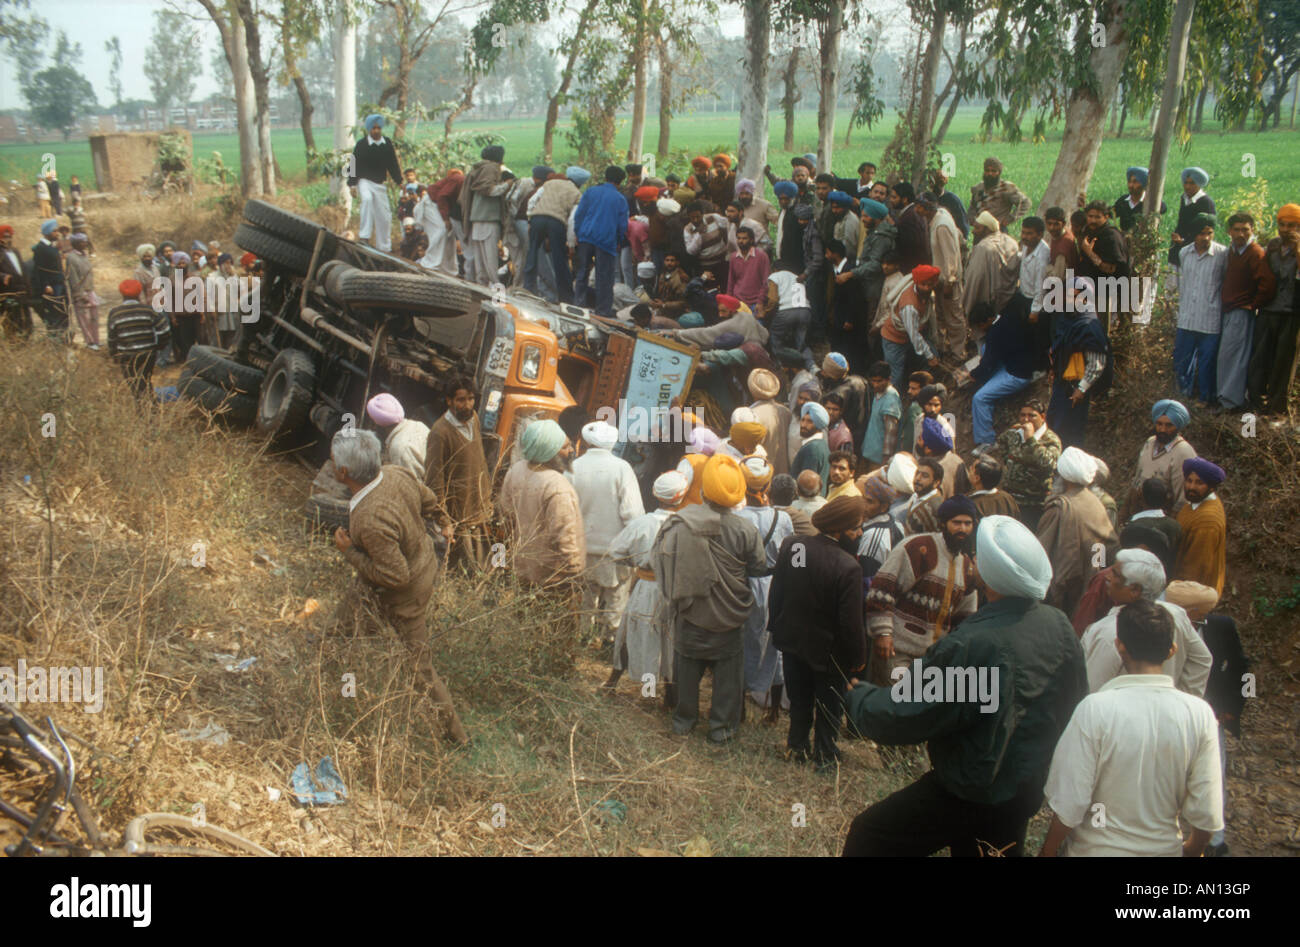 Road accident in the Punjab, India, near Patiala, with crowd of people surrounding overturned lorry. Stock Photo